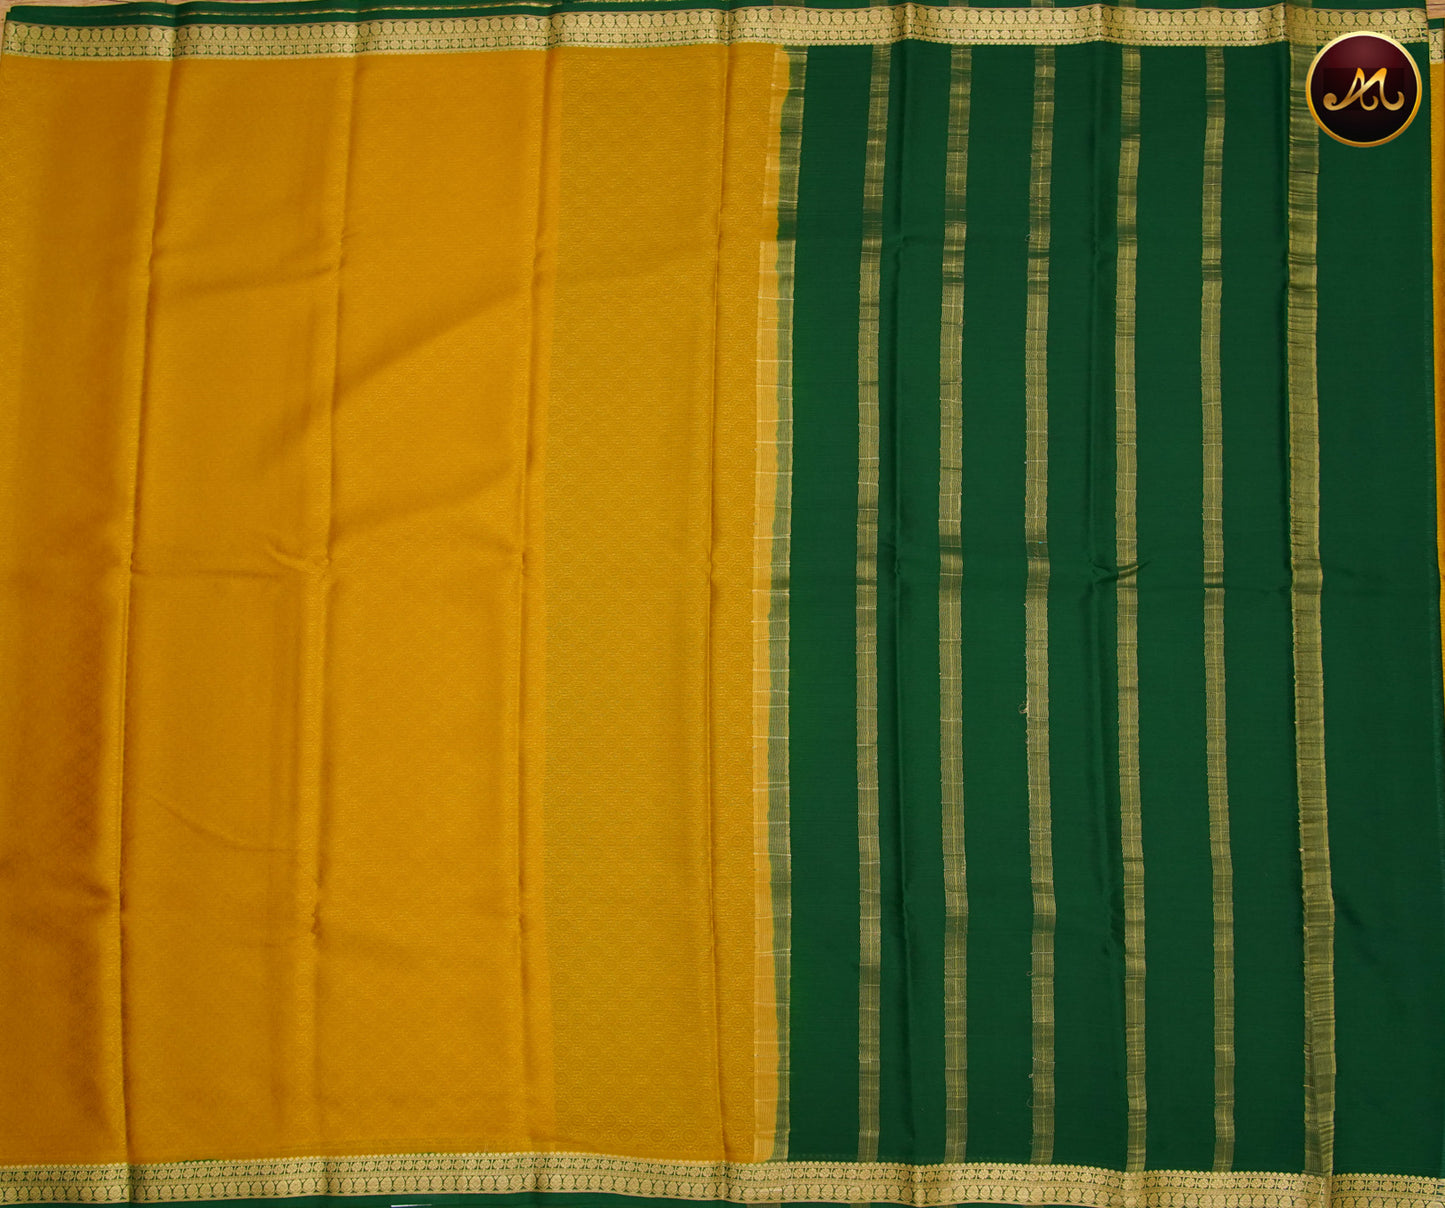 Mysore Crepe Silk saree with KSIC finish in Chutney Green  and Bottle Green combination with Gold Zari Border and Chit Pallu and Silk Emboss allover the body